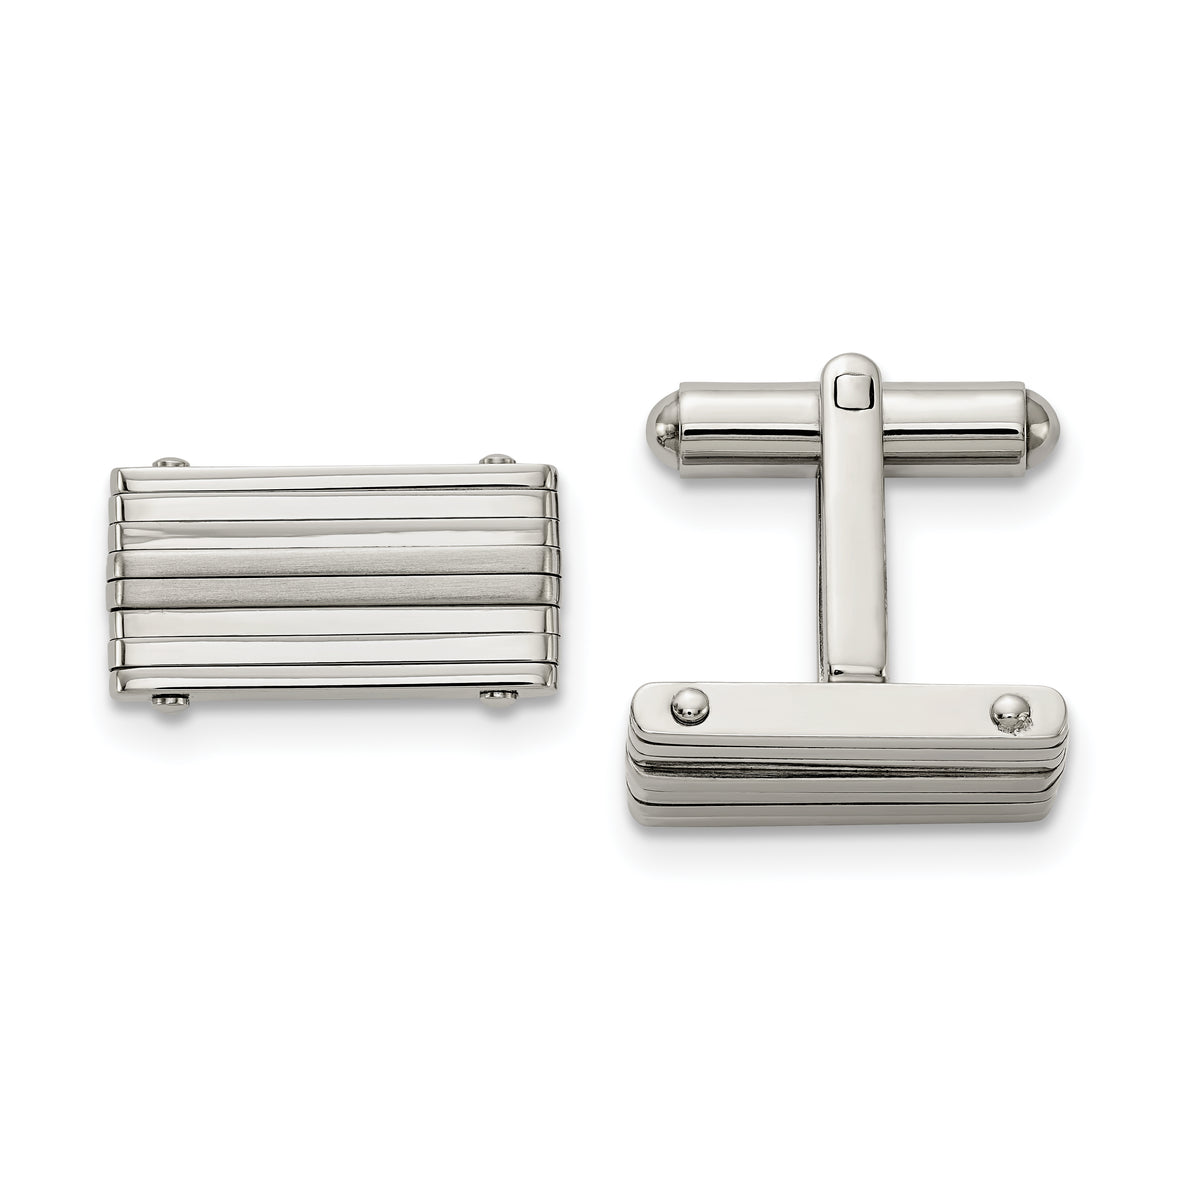 Stainless Steel Brushed and Polished Rectangle Cufflinks